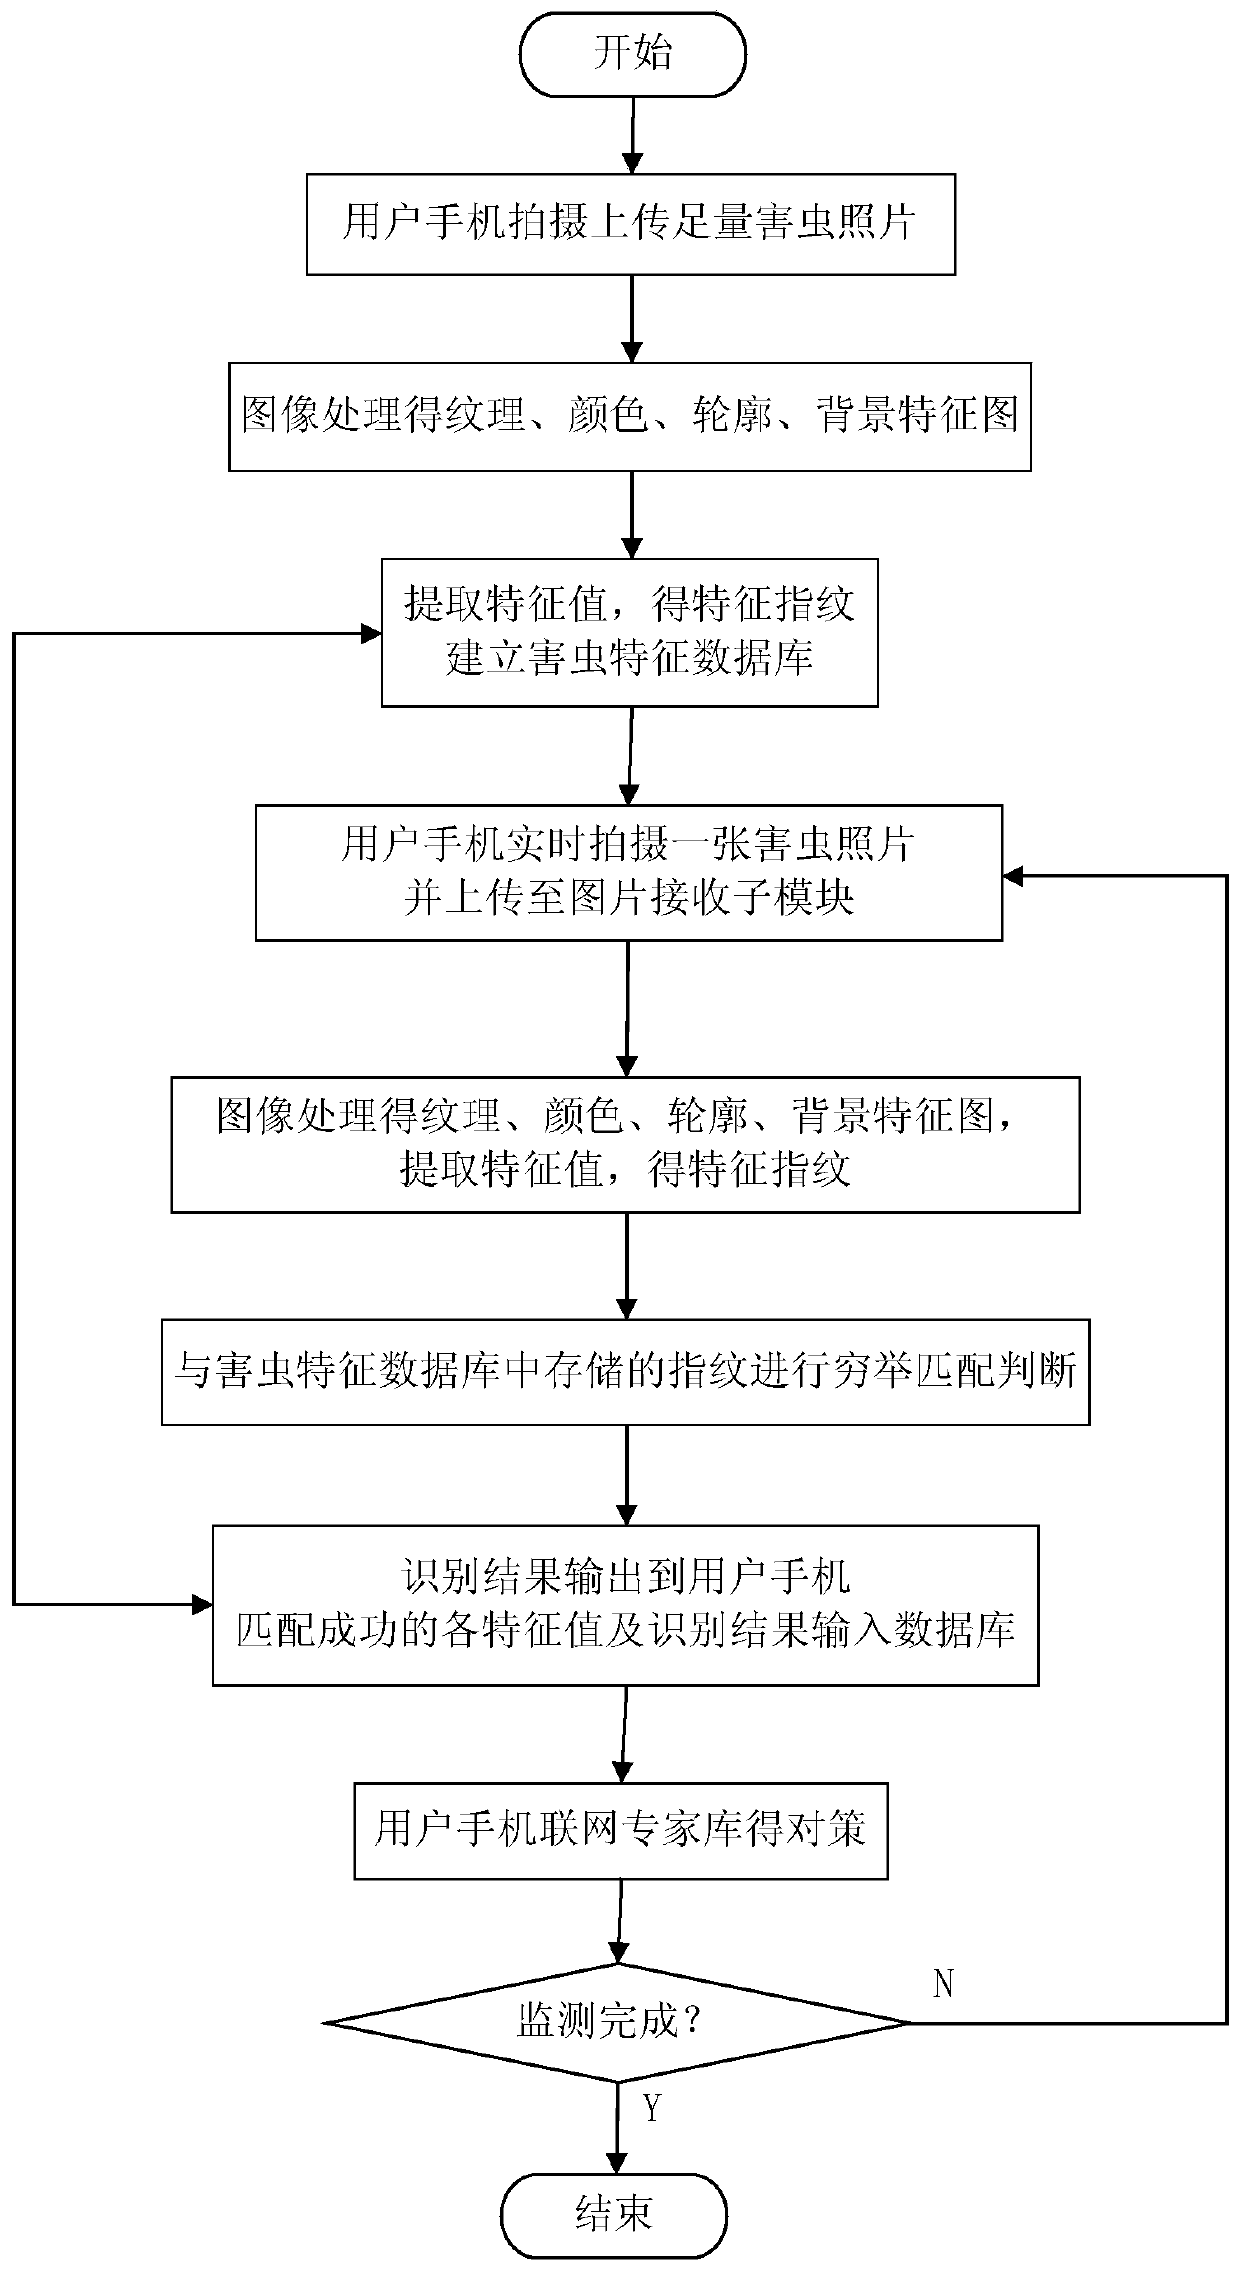 Litchi pest monitoring and identifying system and method